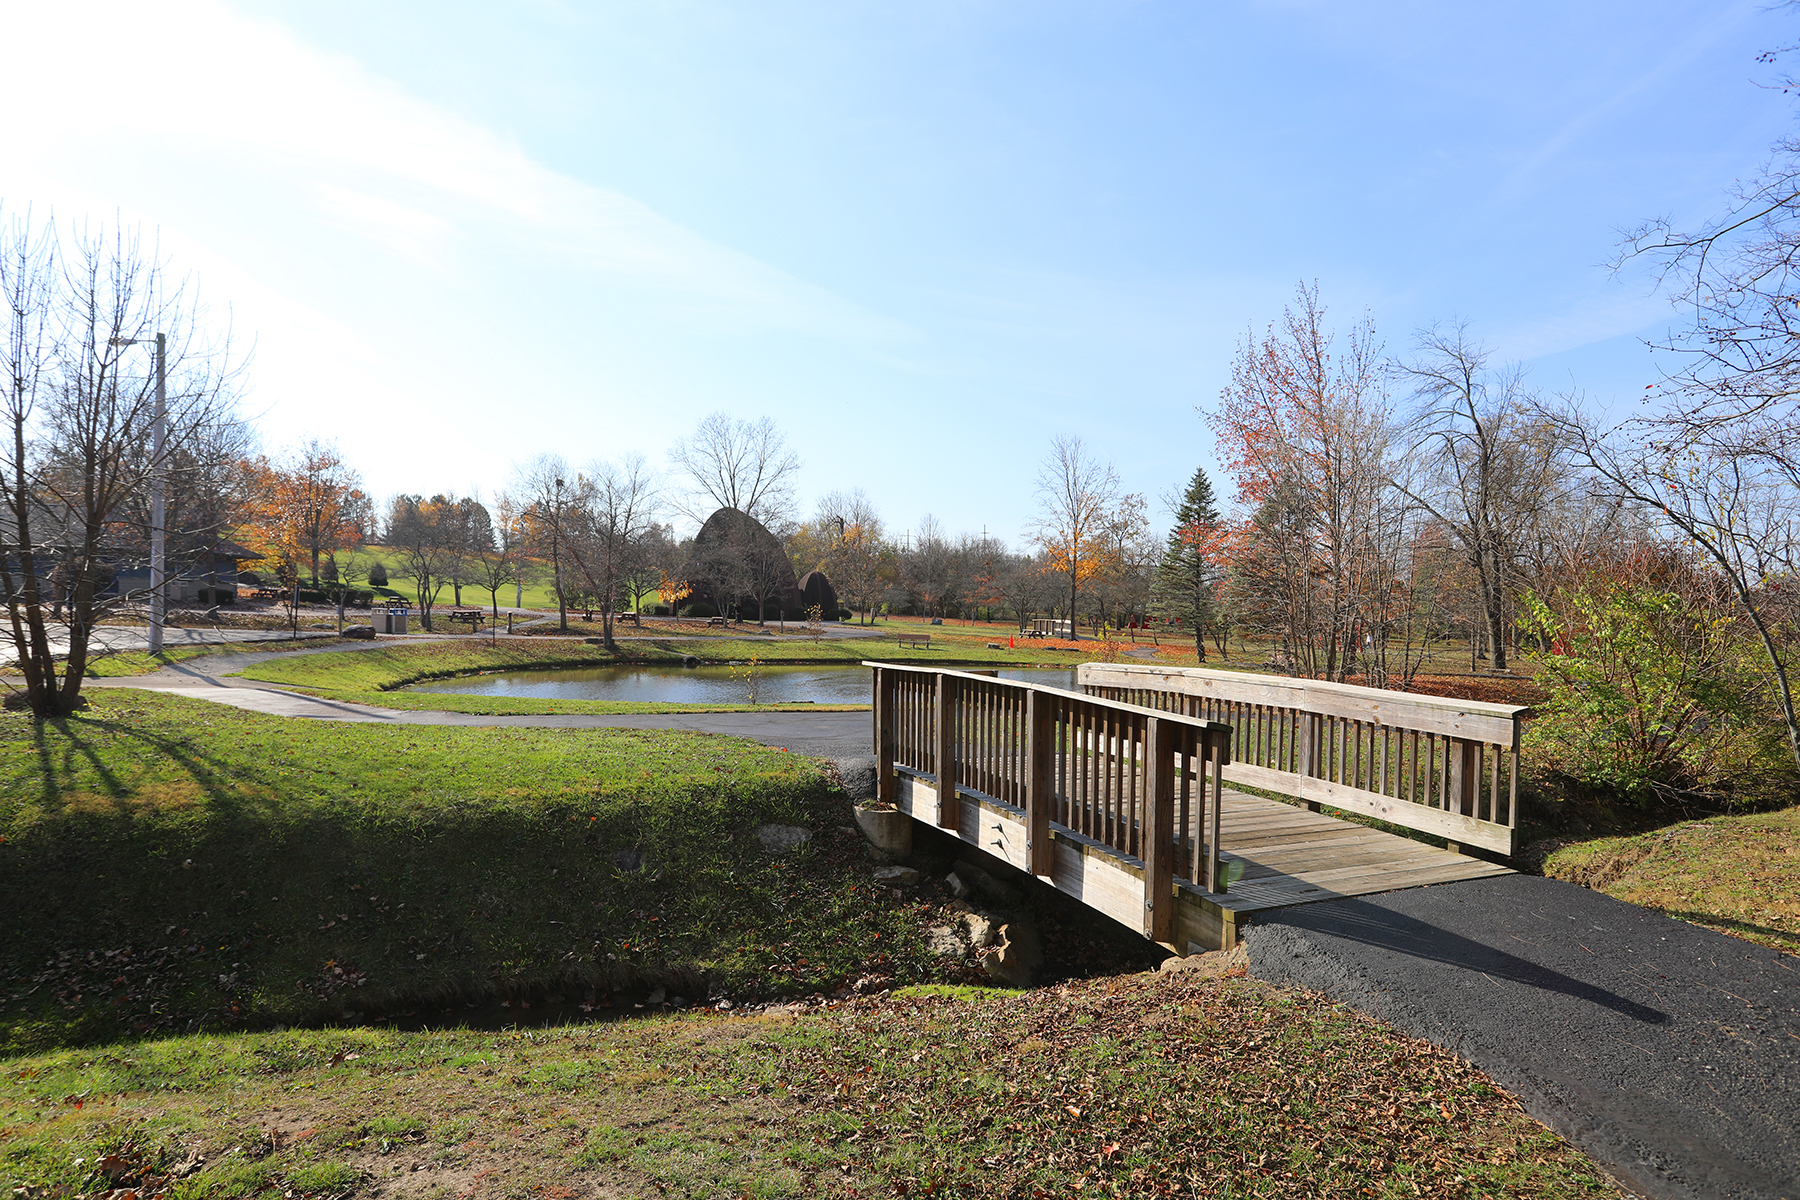 A large park in midday featuring a small bridge, a pond, and well-maintained landscaping.